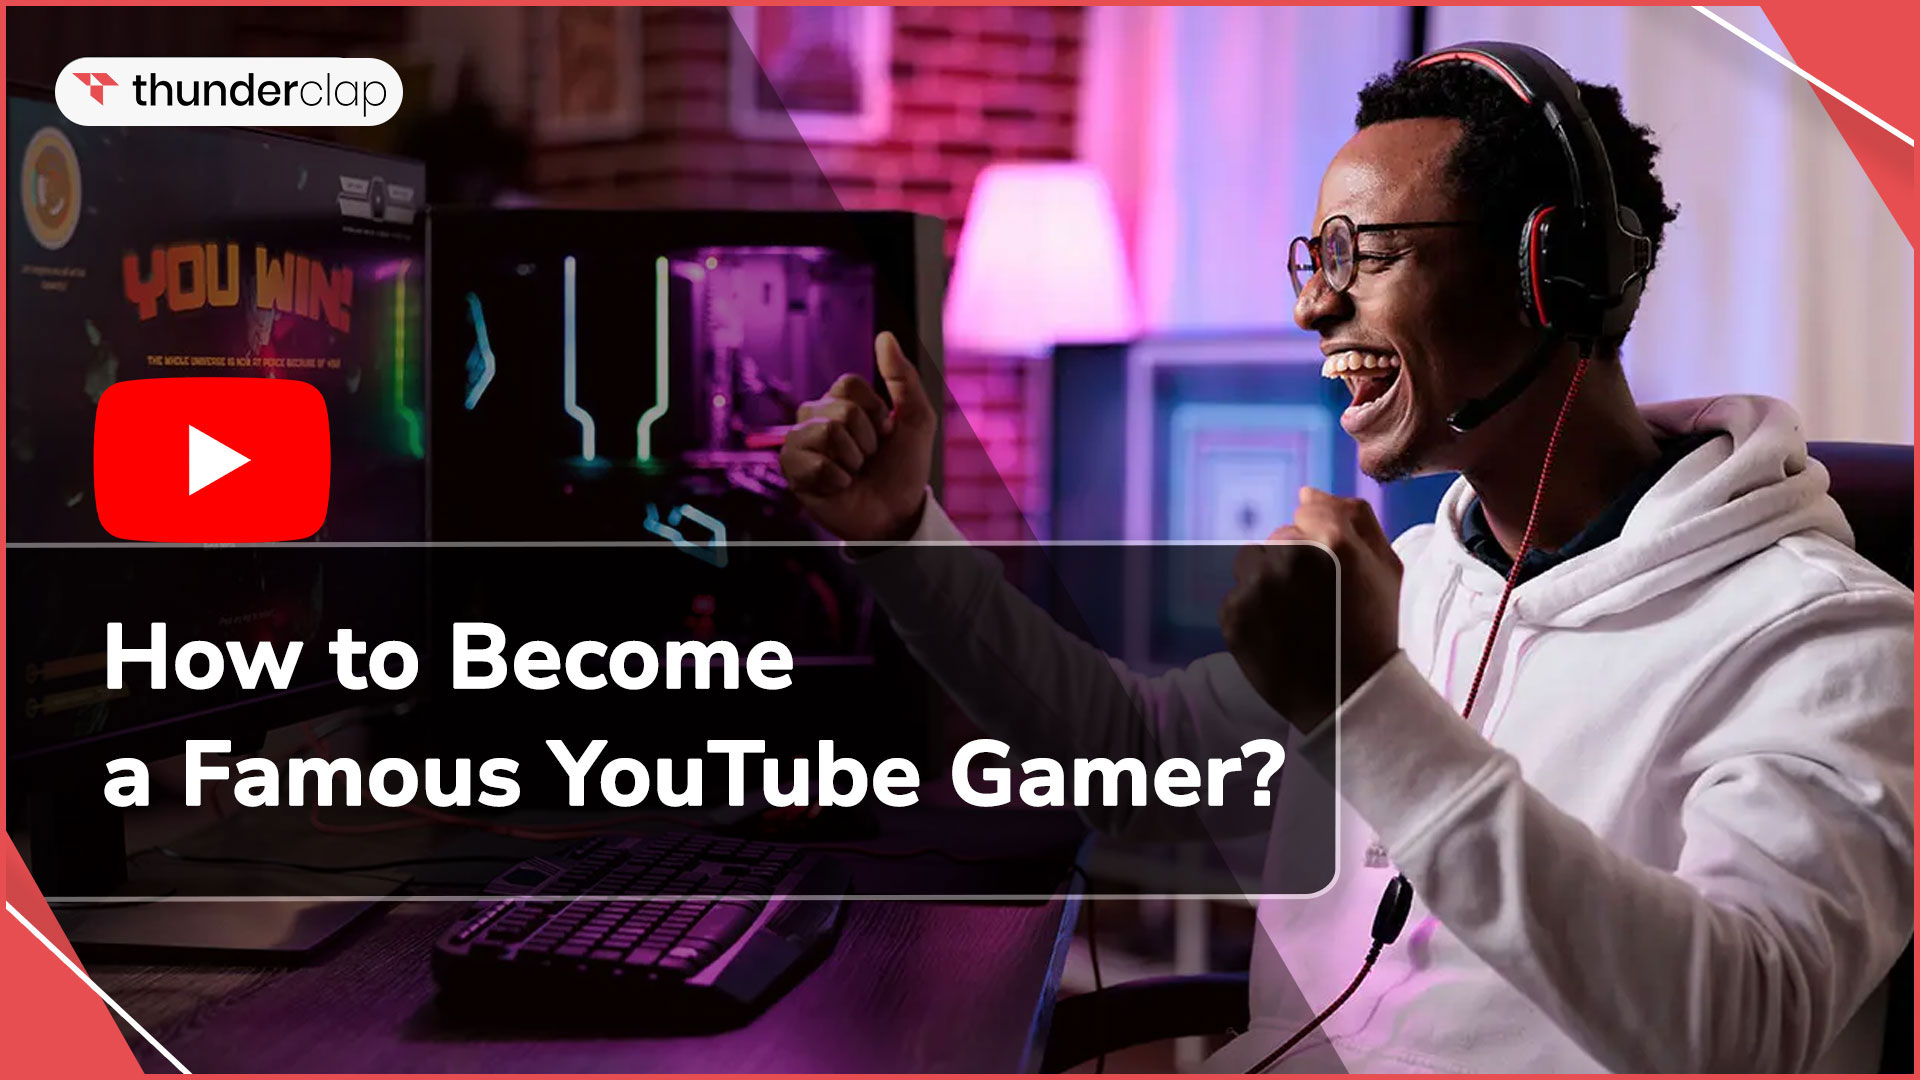 How to Become a Famous YouTube Gamer?